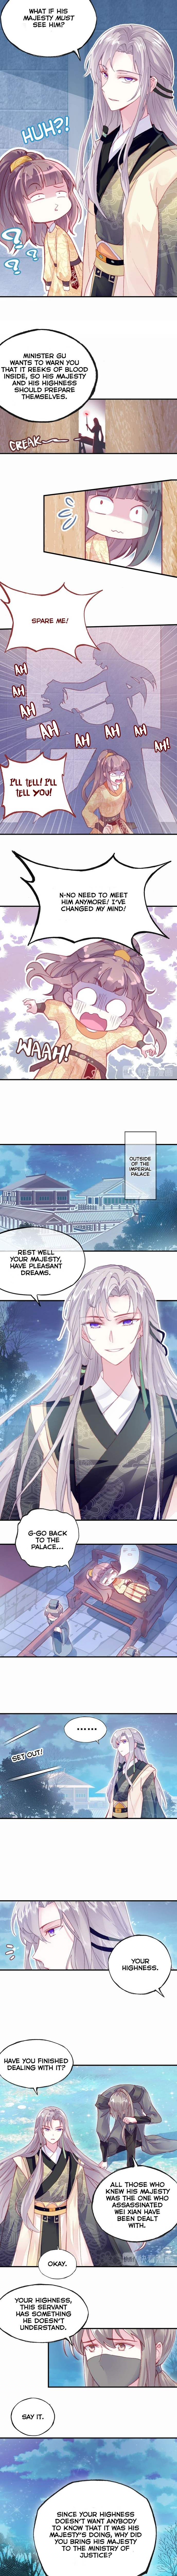 His Majesty Doesn't Want To Be Too Bossy ch.2